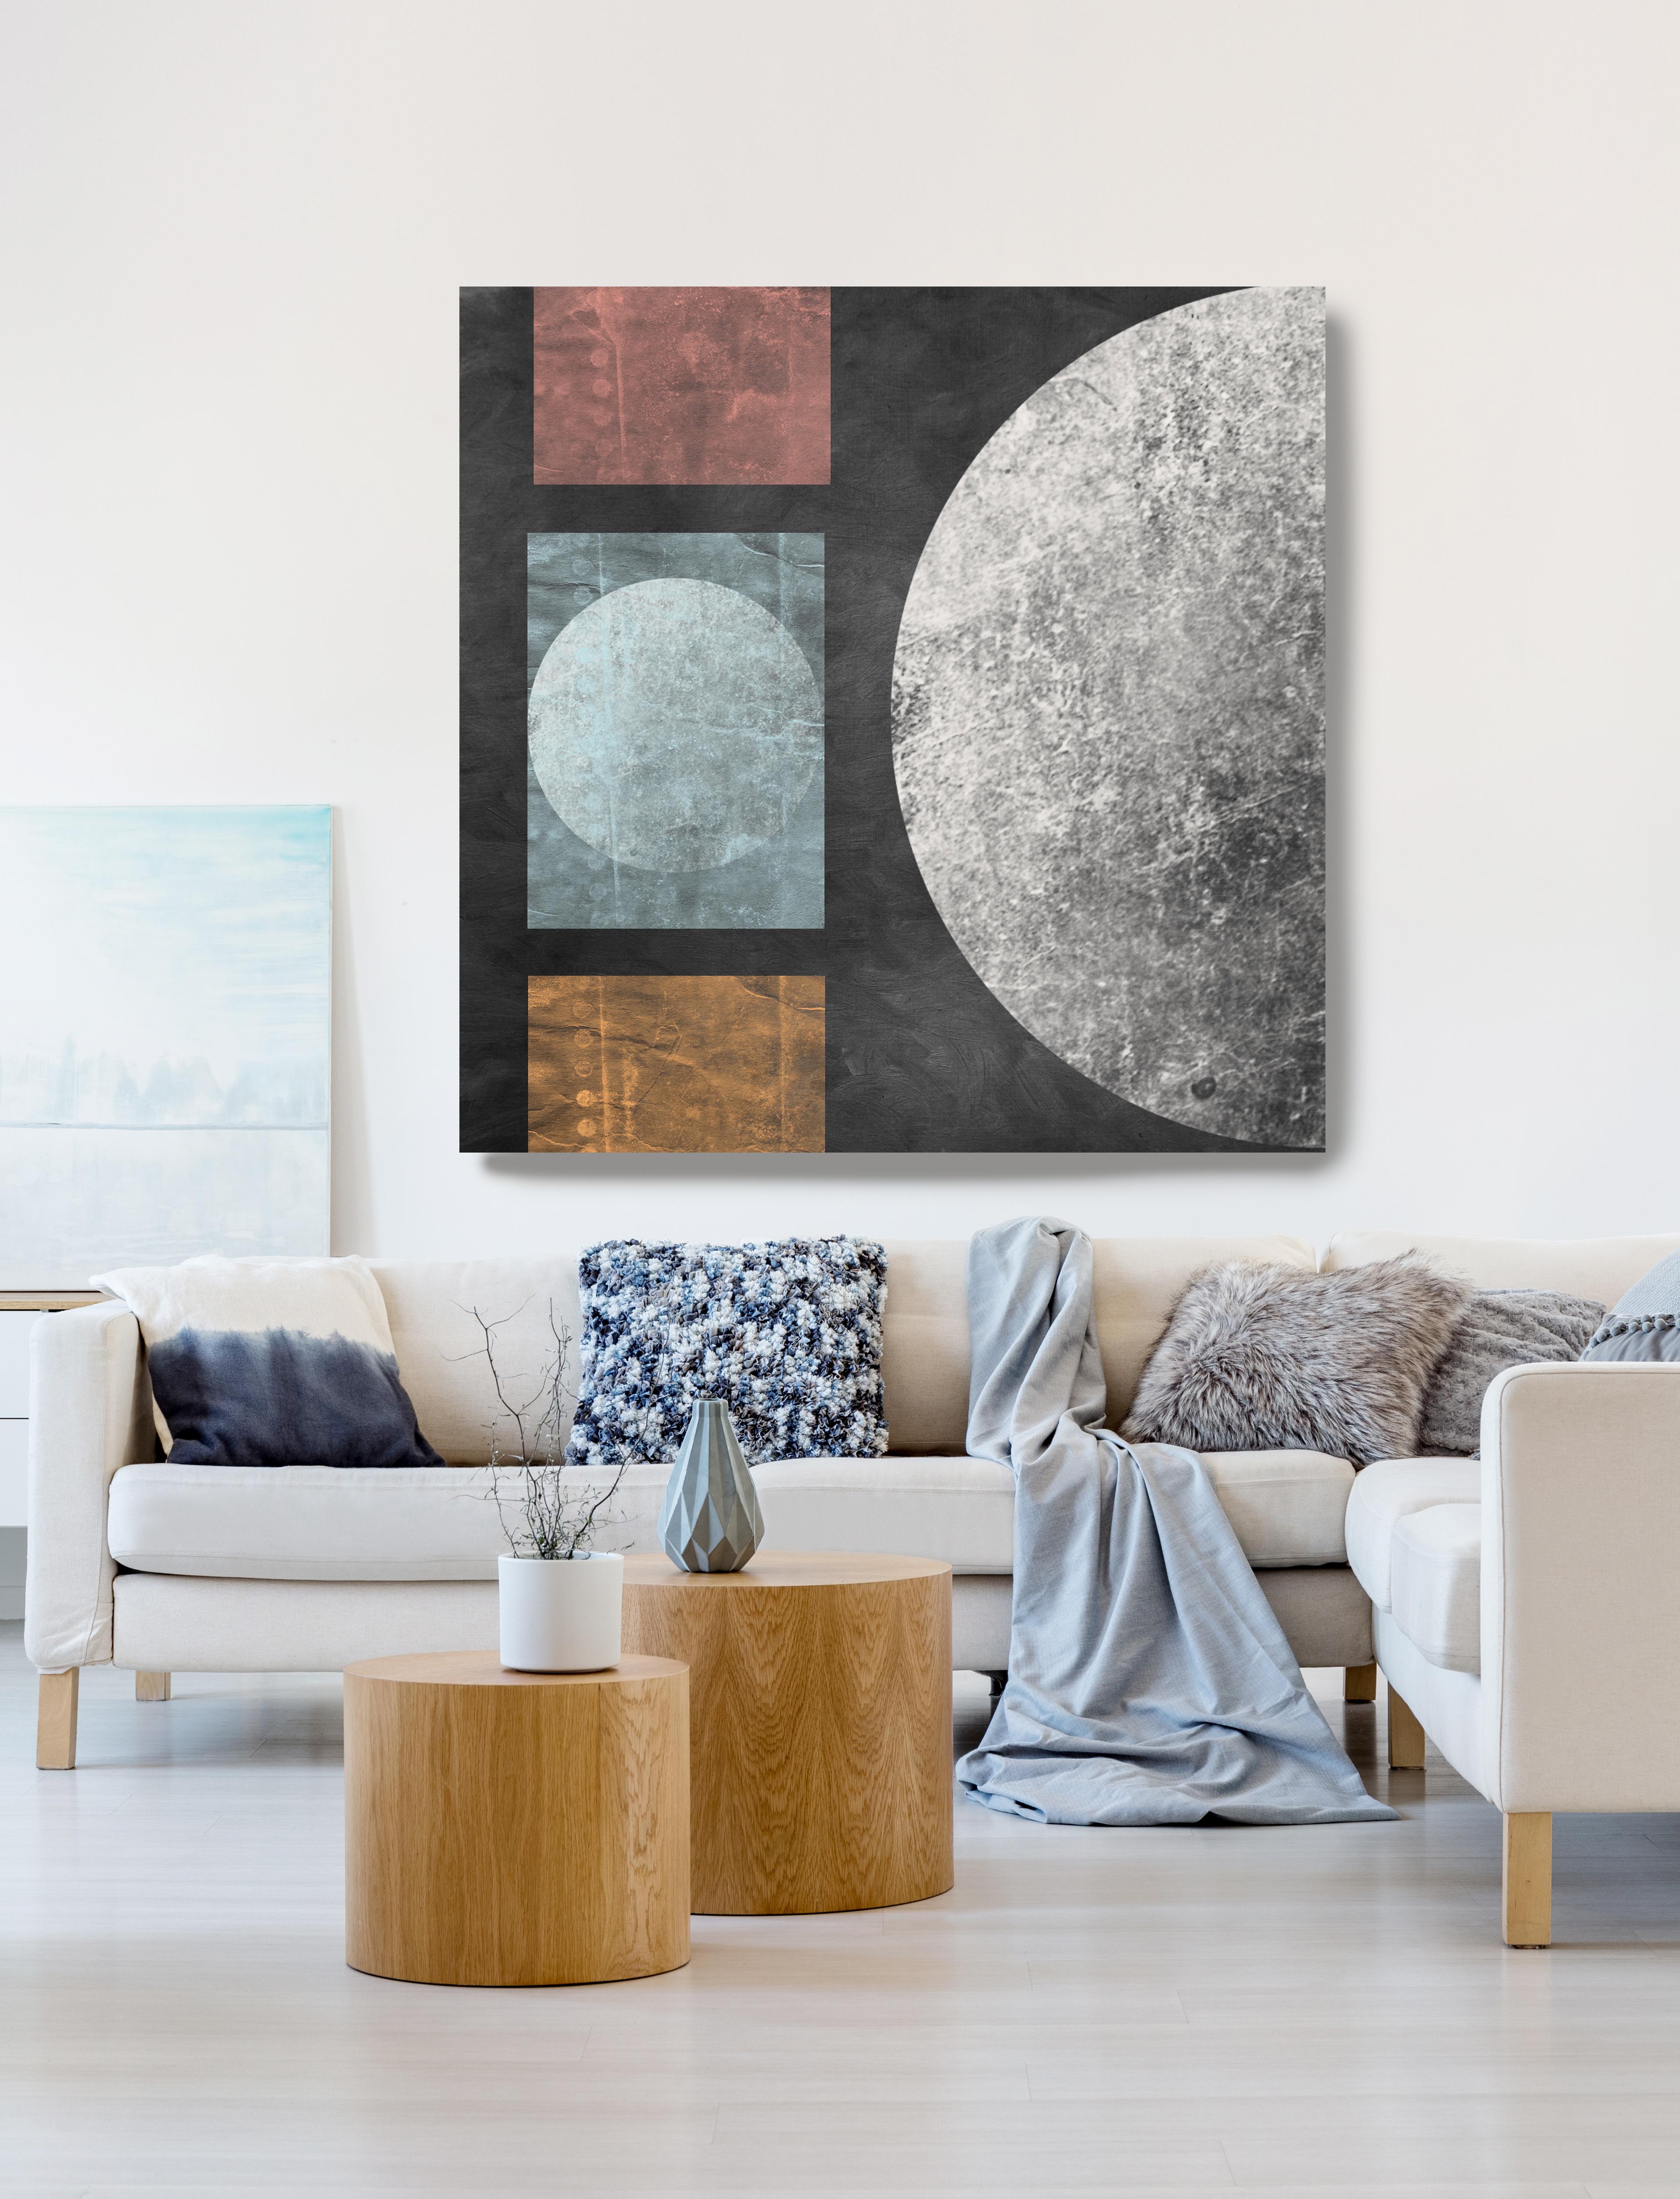 Geometry MYSTERY MOON 6, Mixed Media Painting On Canvas 48 x 48" Astronomy Space